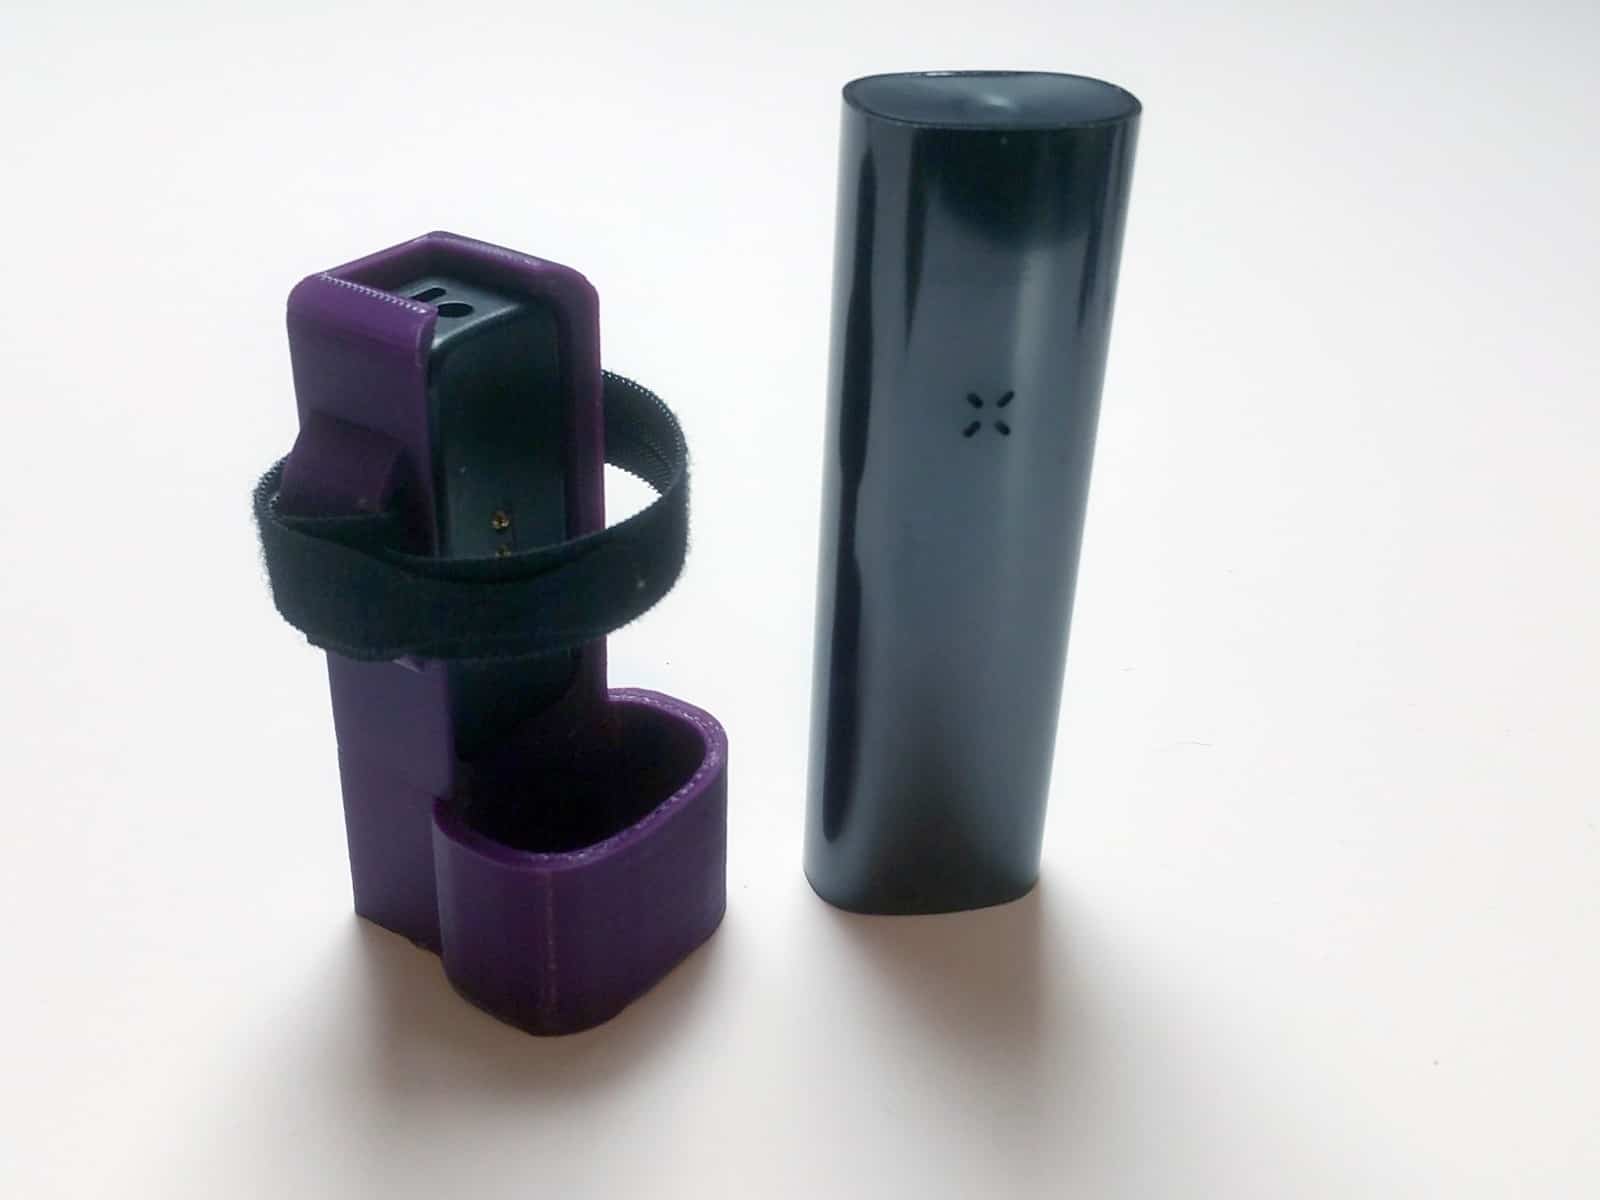 Parts & Accessories for PAX Vaporizers